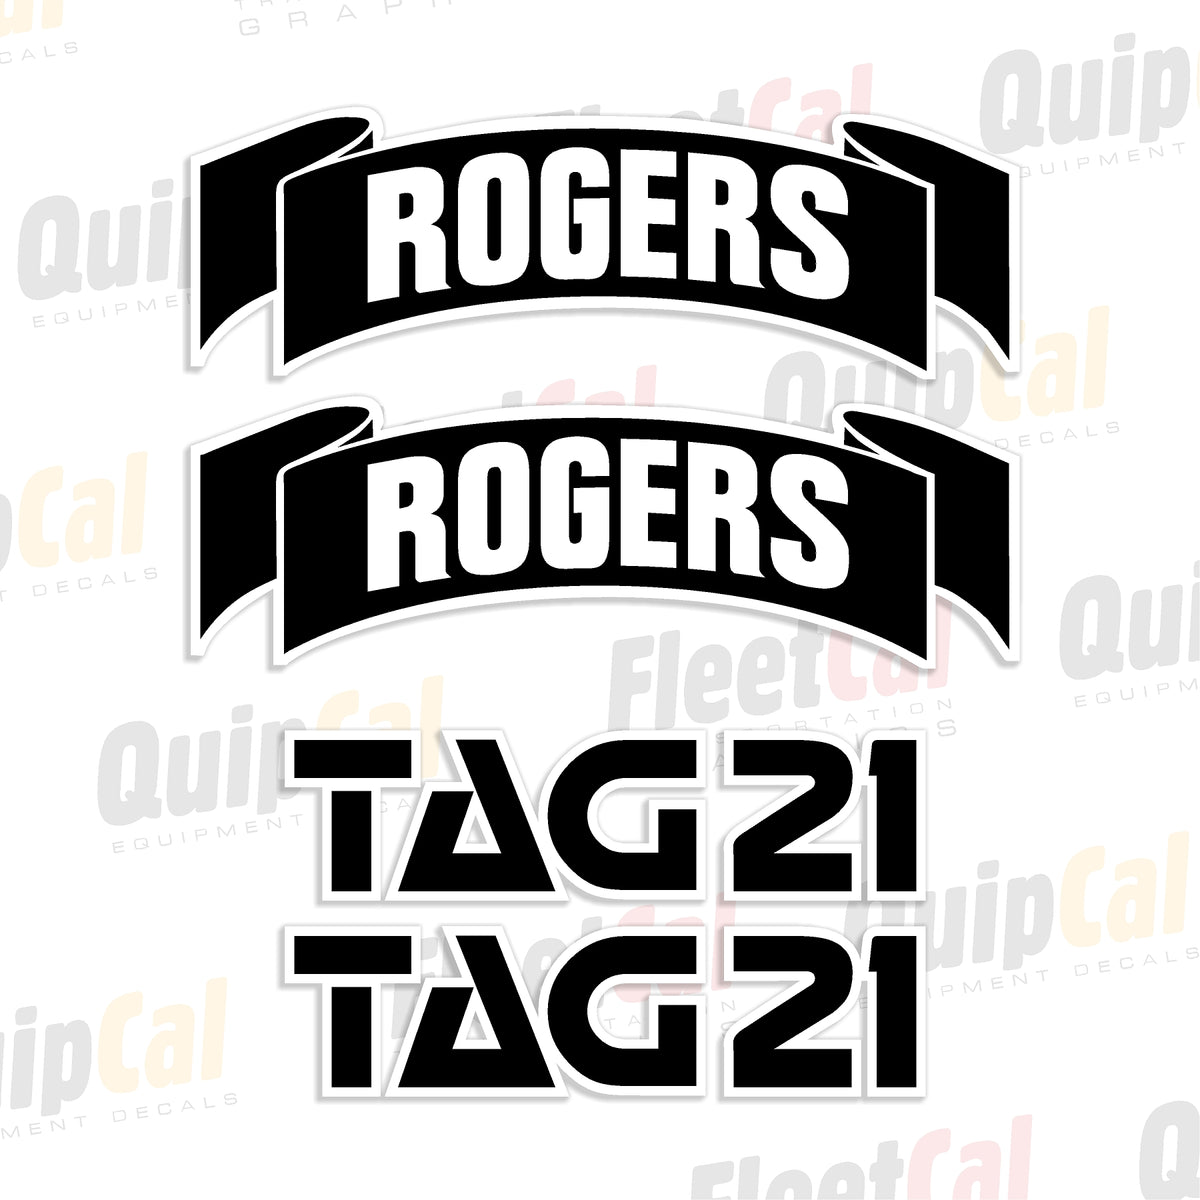 Rogers Trailer Decal Set